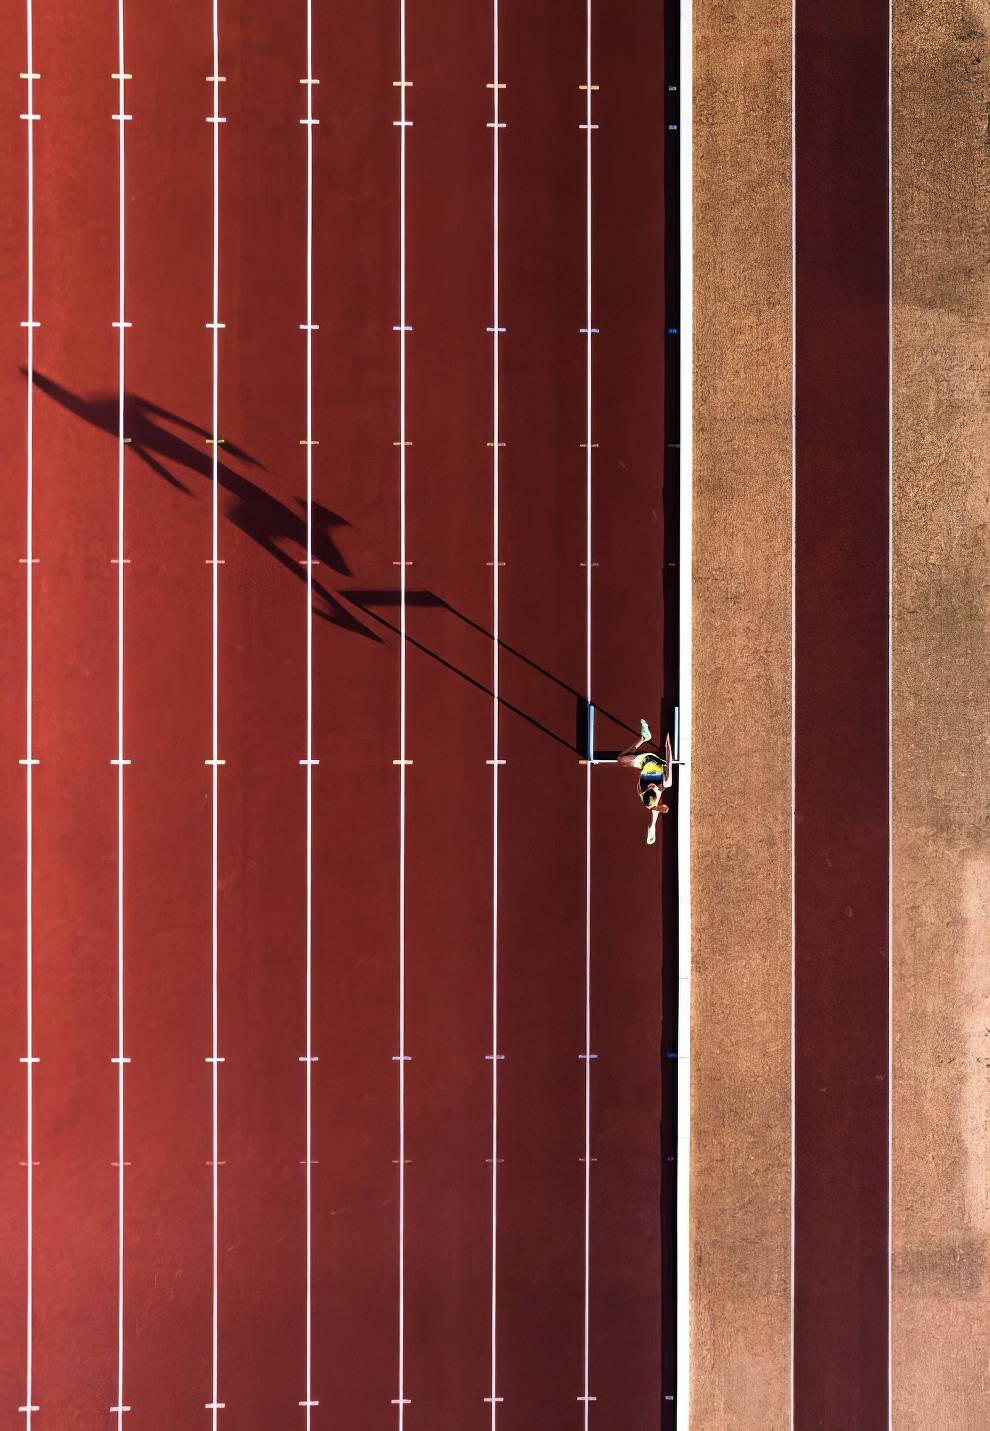 Siena Drone Photography Awards Finalists 20 